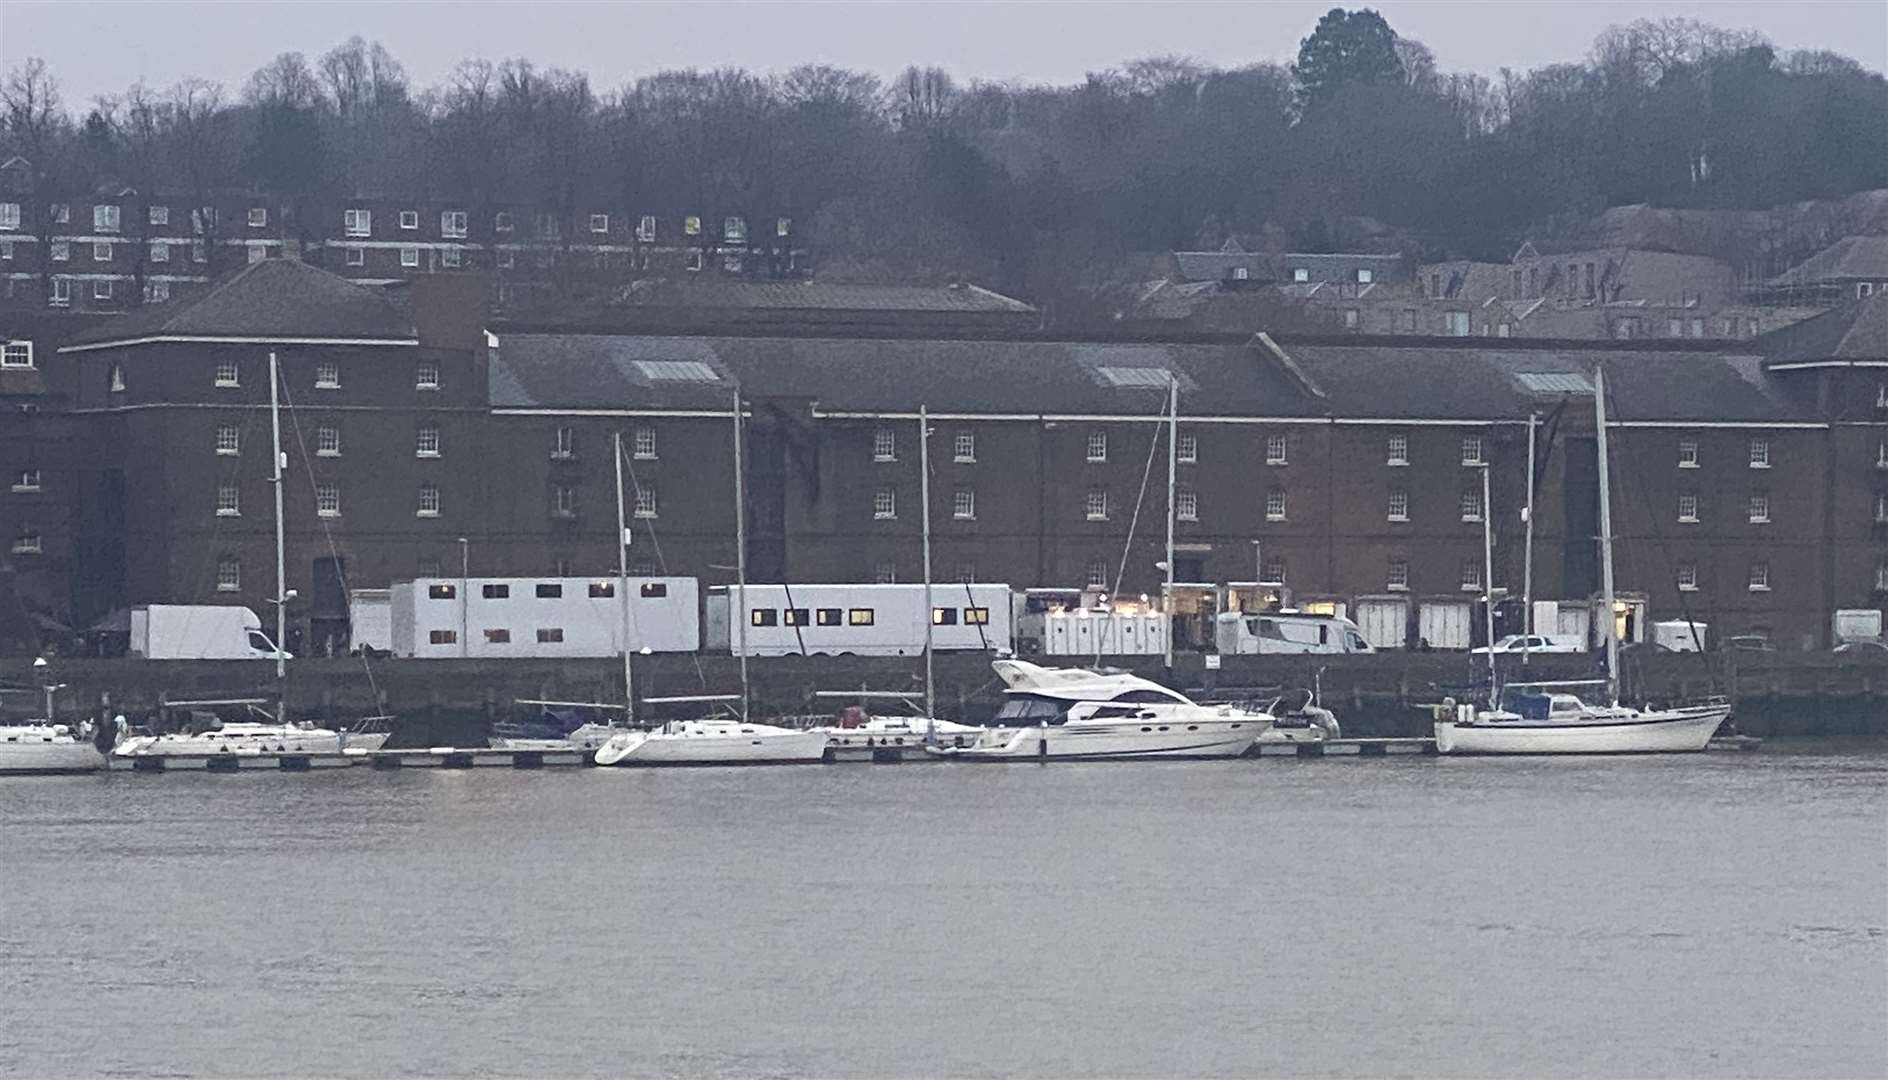 The film crew spotted along the River Medway at Chatham Historic Dockyard